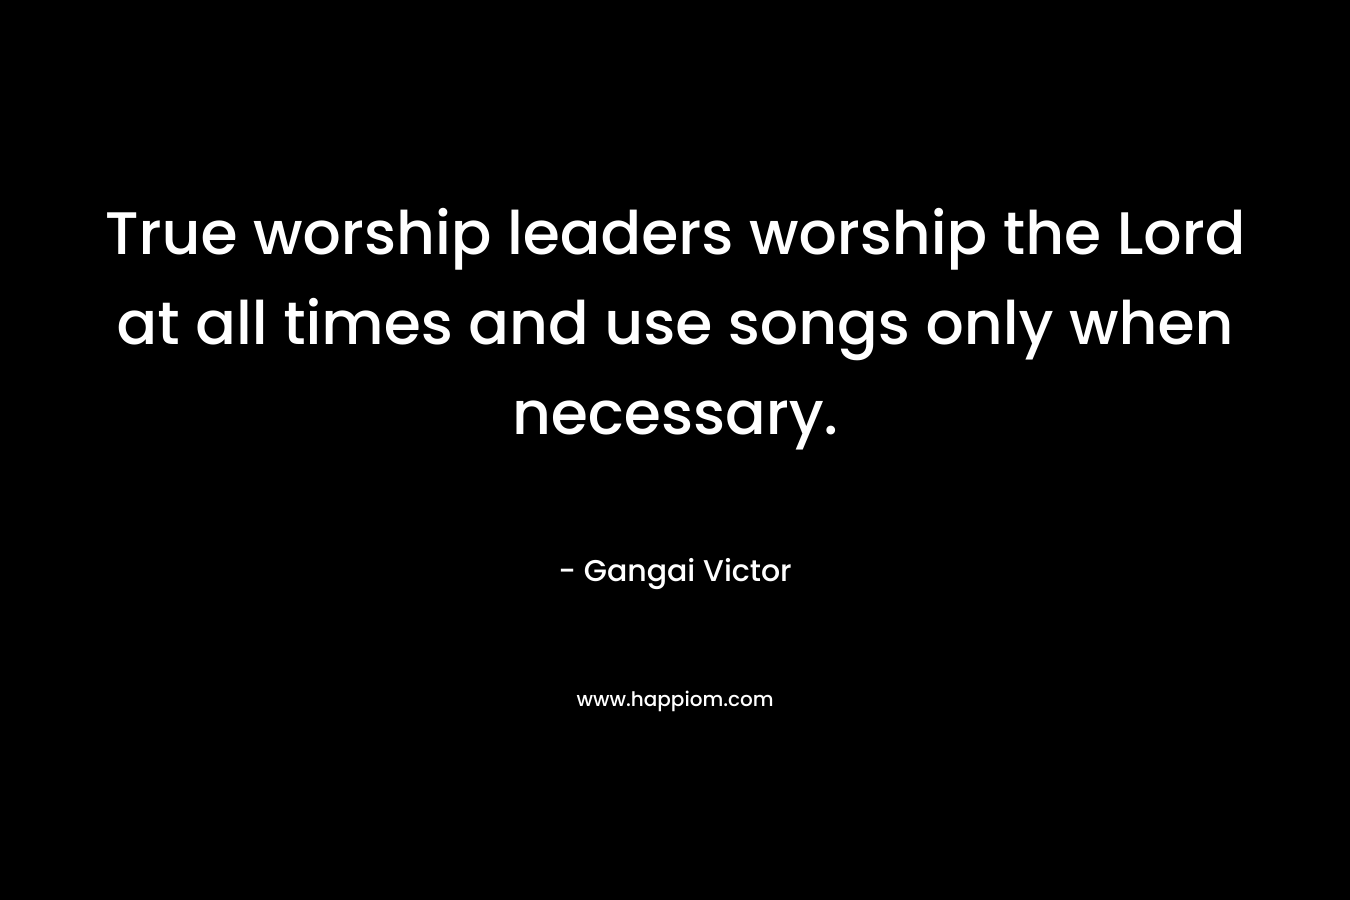 True worship leaders worship the Lord at all times and use songs only when necessary.